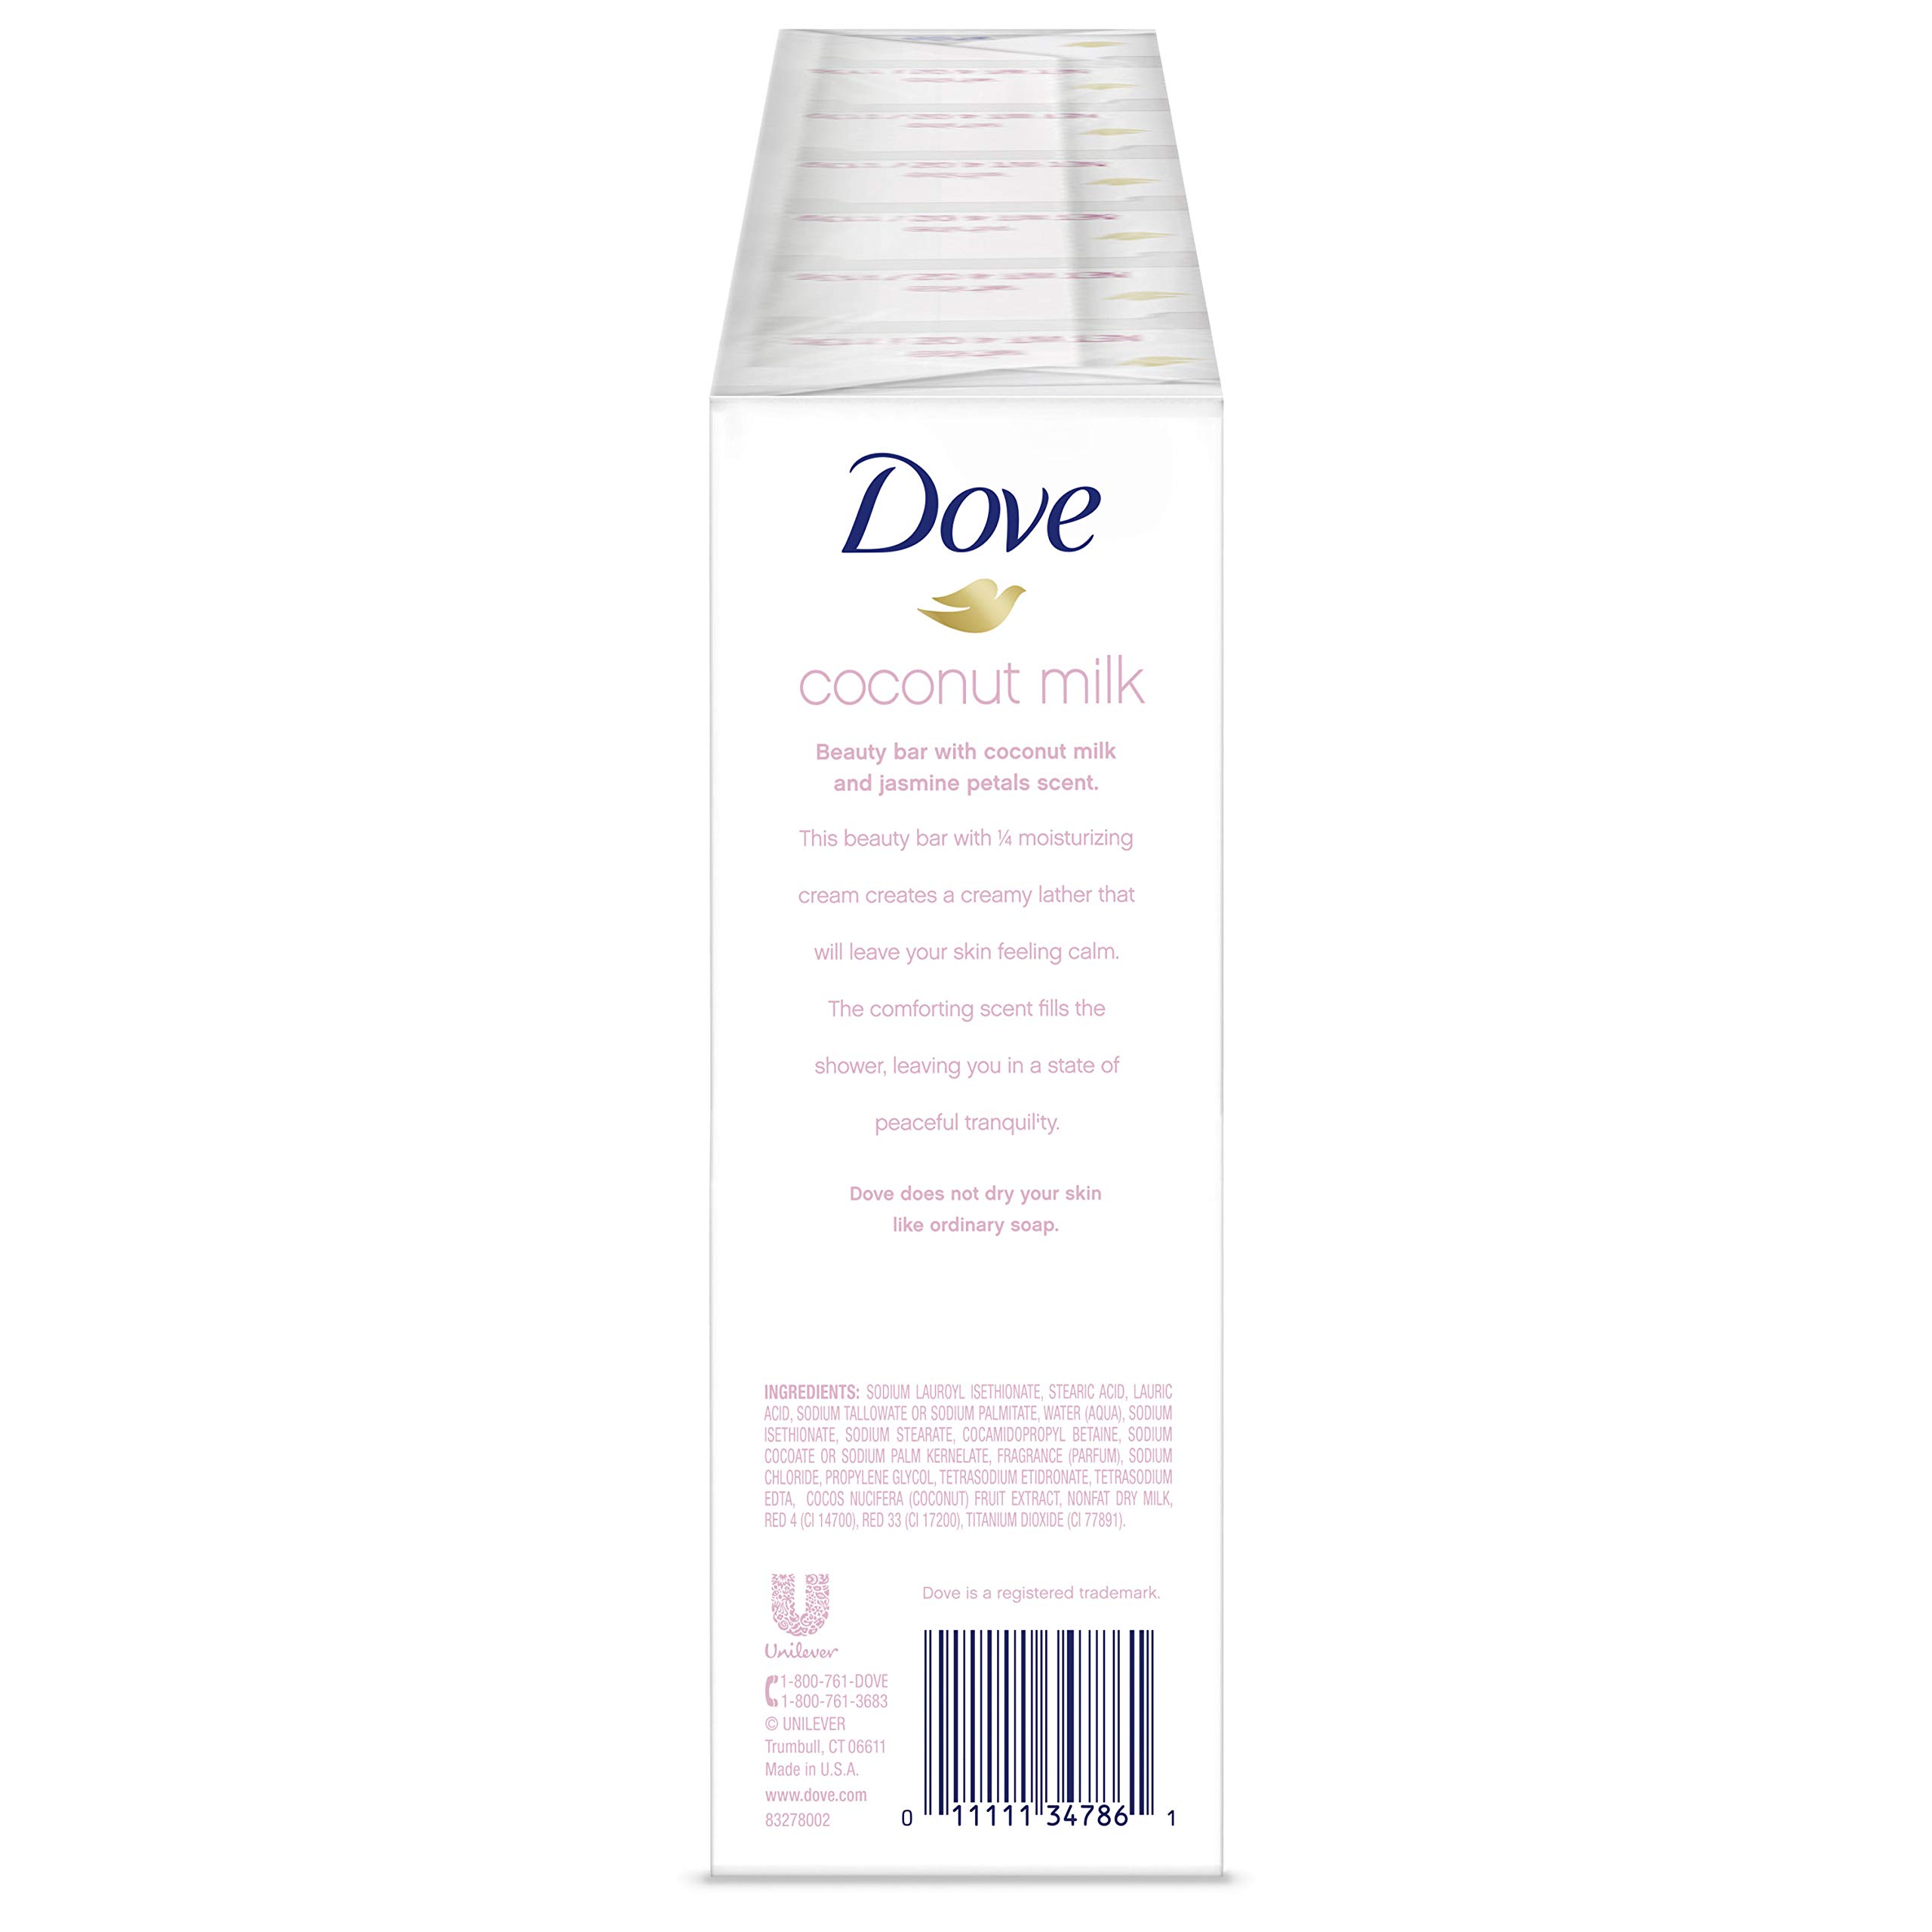 Dove Purely Pampering Beauty Bar More Moisturizing Than Traditional Bar Soaps Coconut Milk Made With 1/4 Moisturizing Cream 3.75 oz, 8 Bars